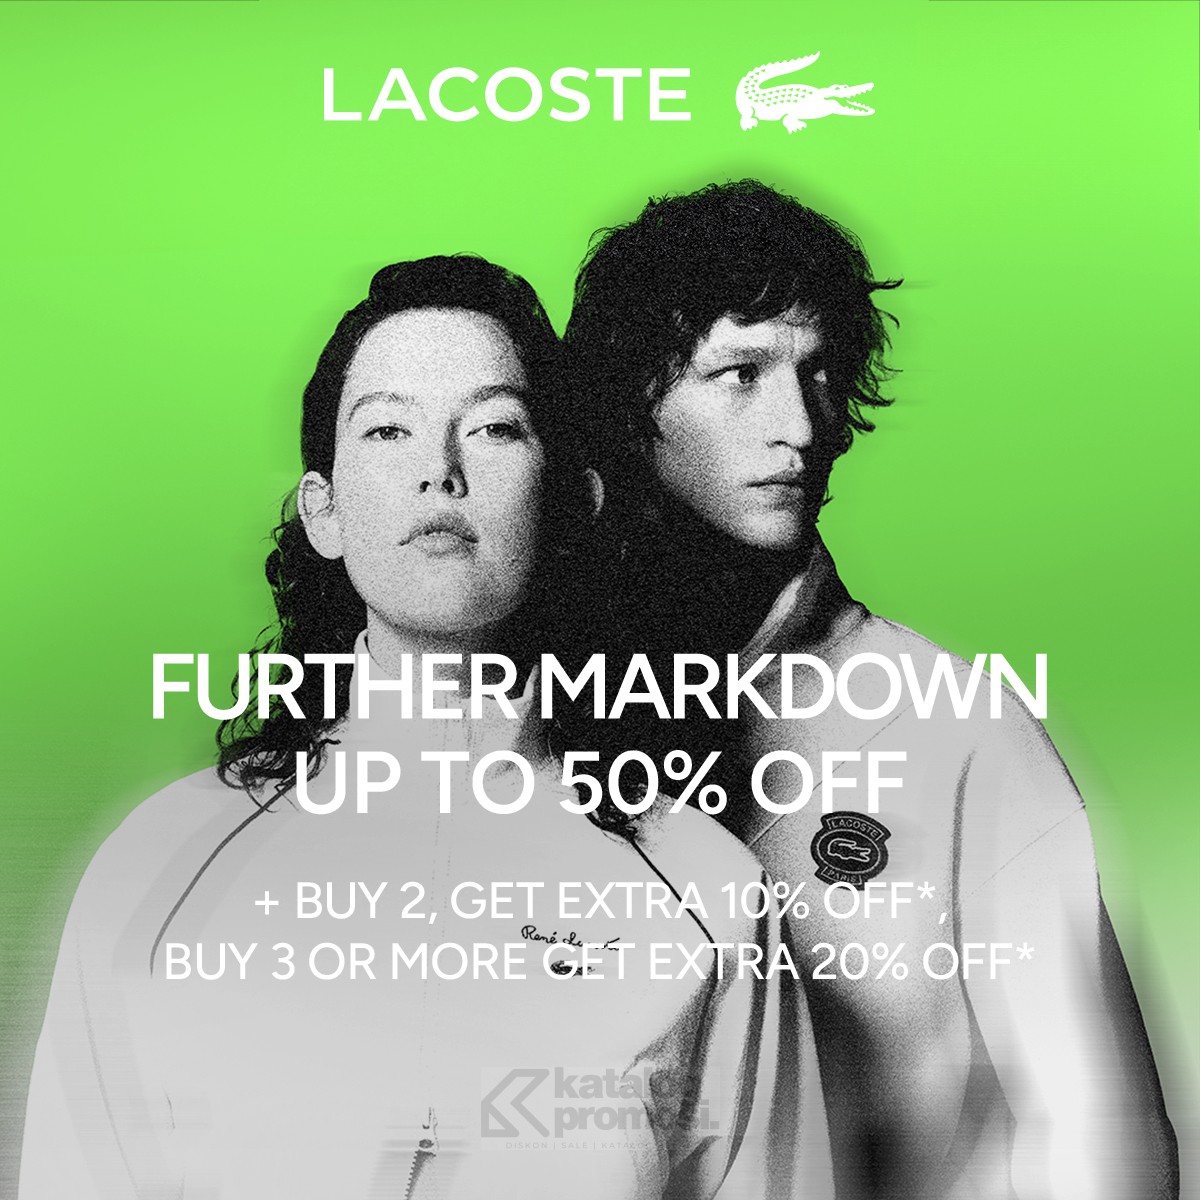 PROMO LACOSTE FURTHER MARKDOWN SALE Up To 50% OFF*